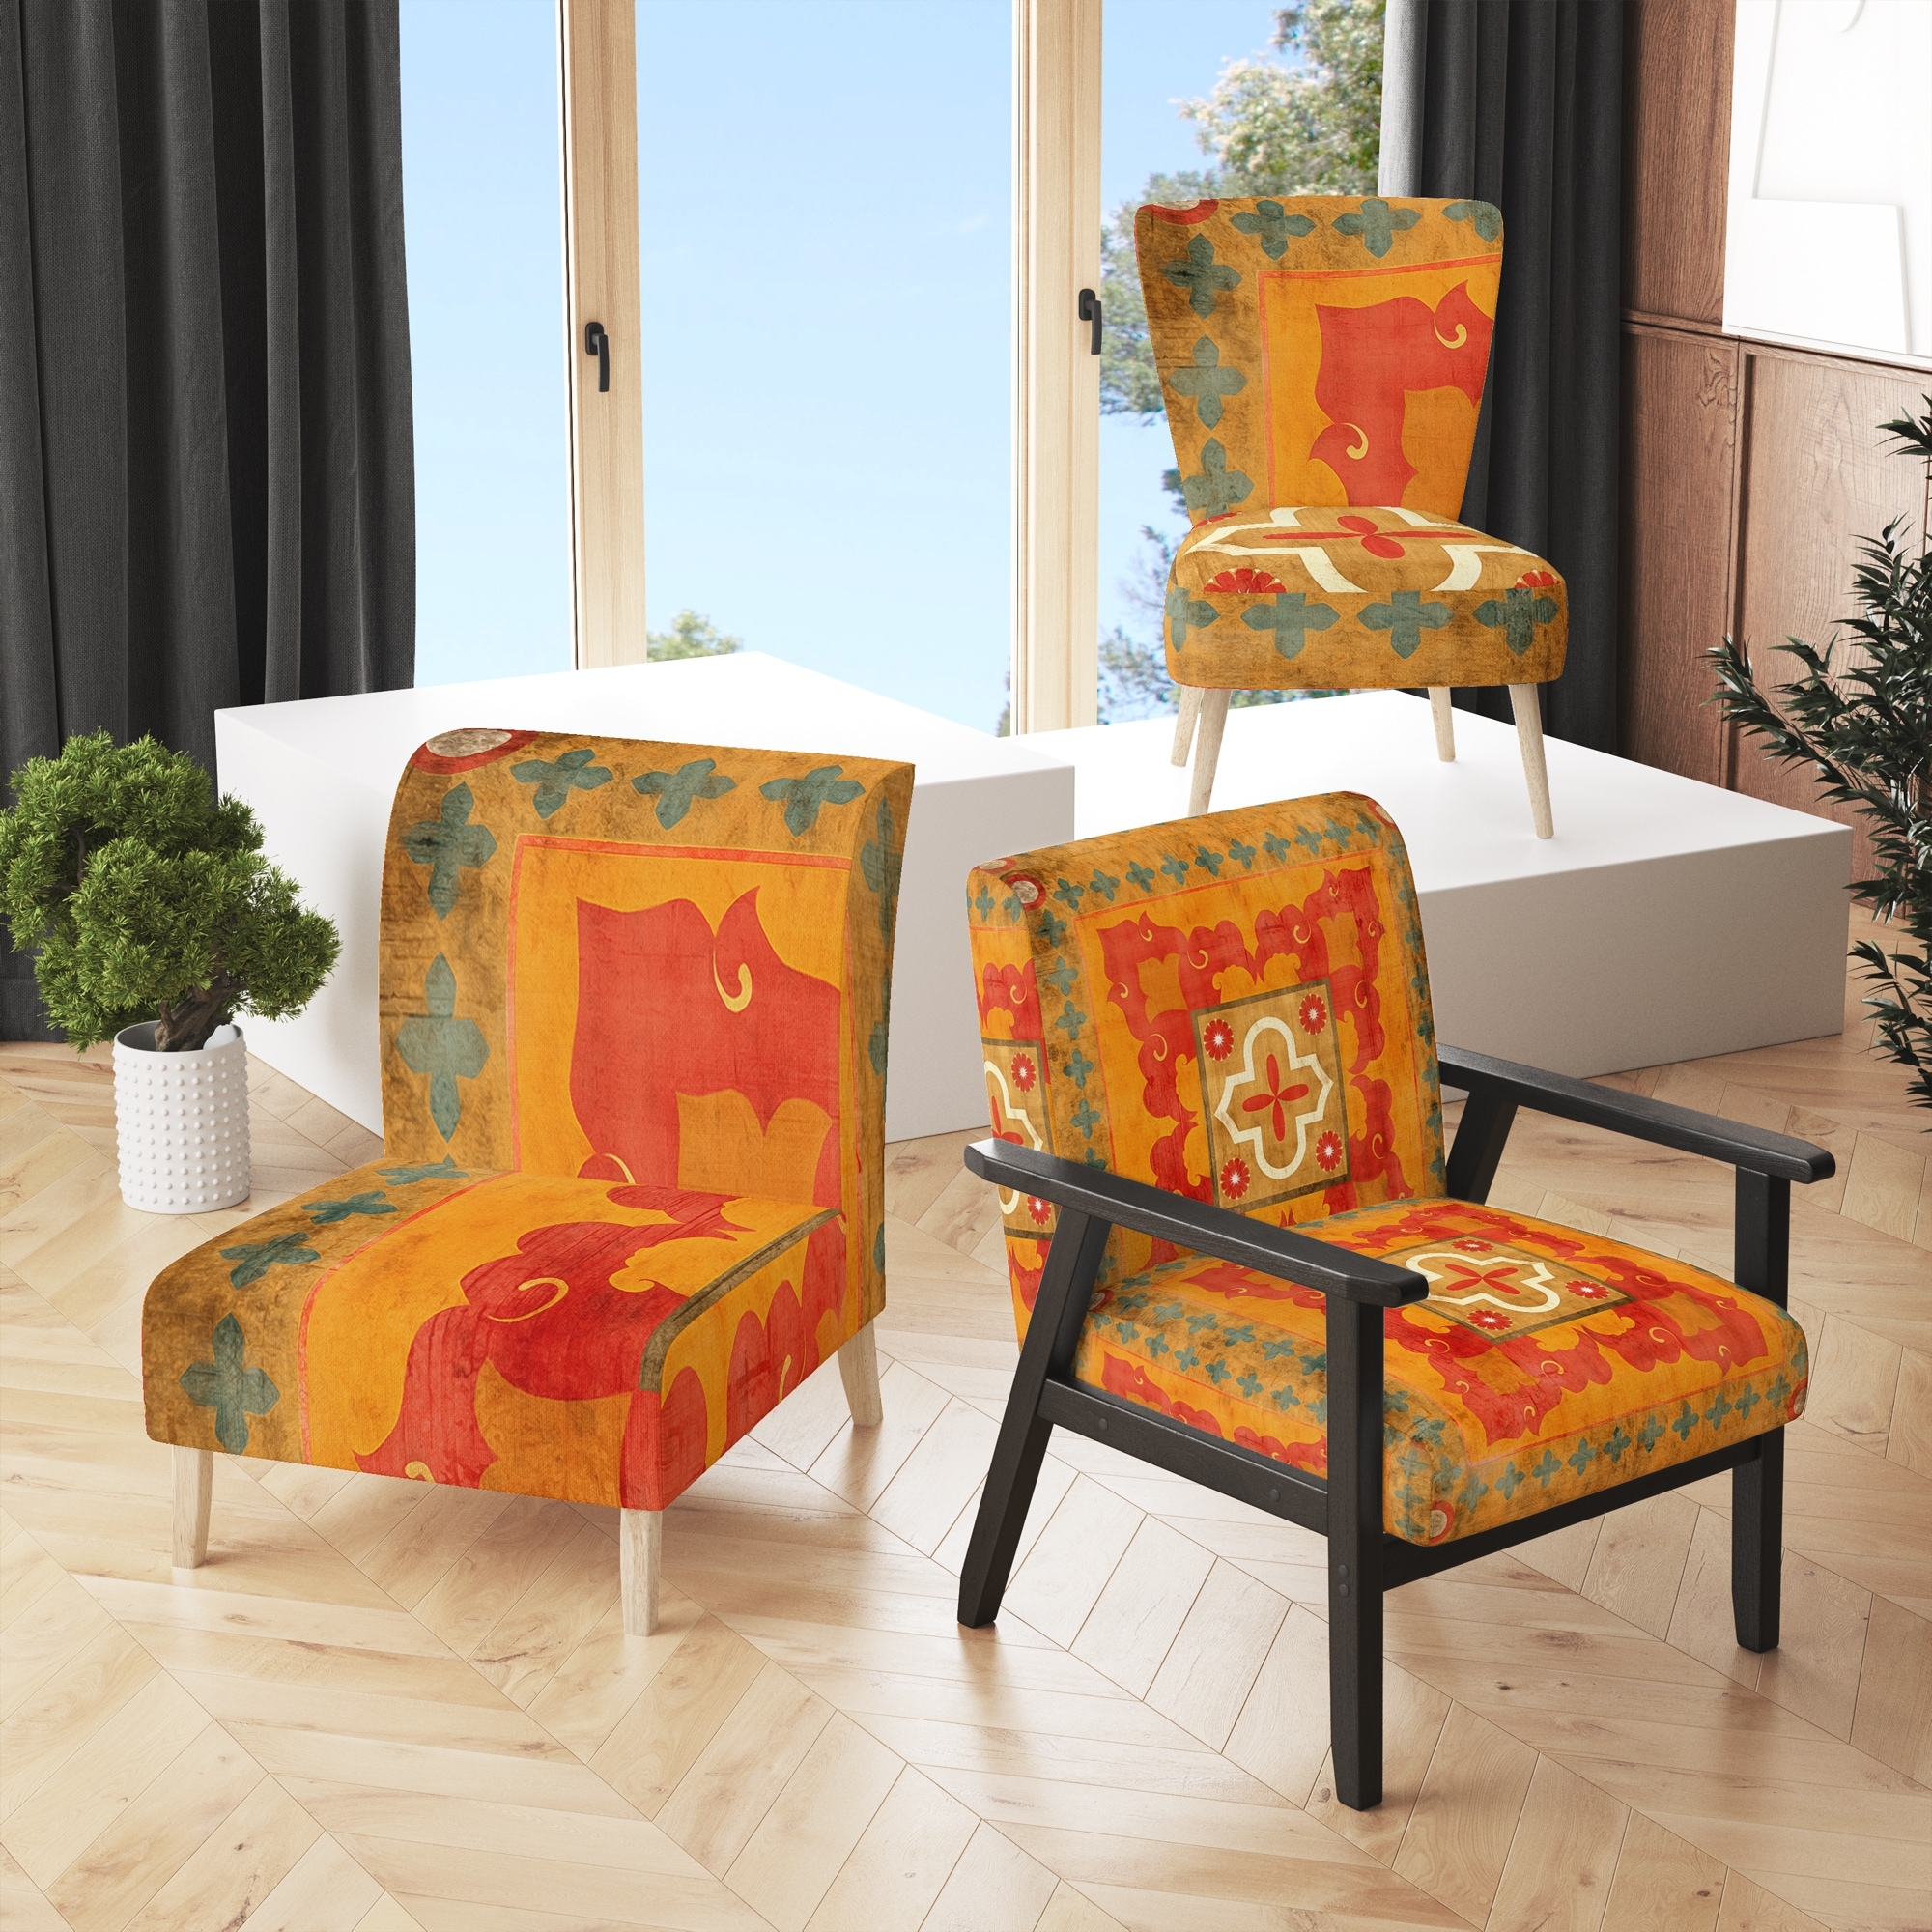 Designart "Moroccan Orange Tiles Collage II" Upholstered Bohemian Chic Accent Chair - Arm Chair